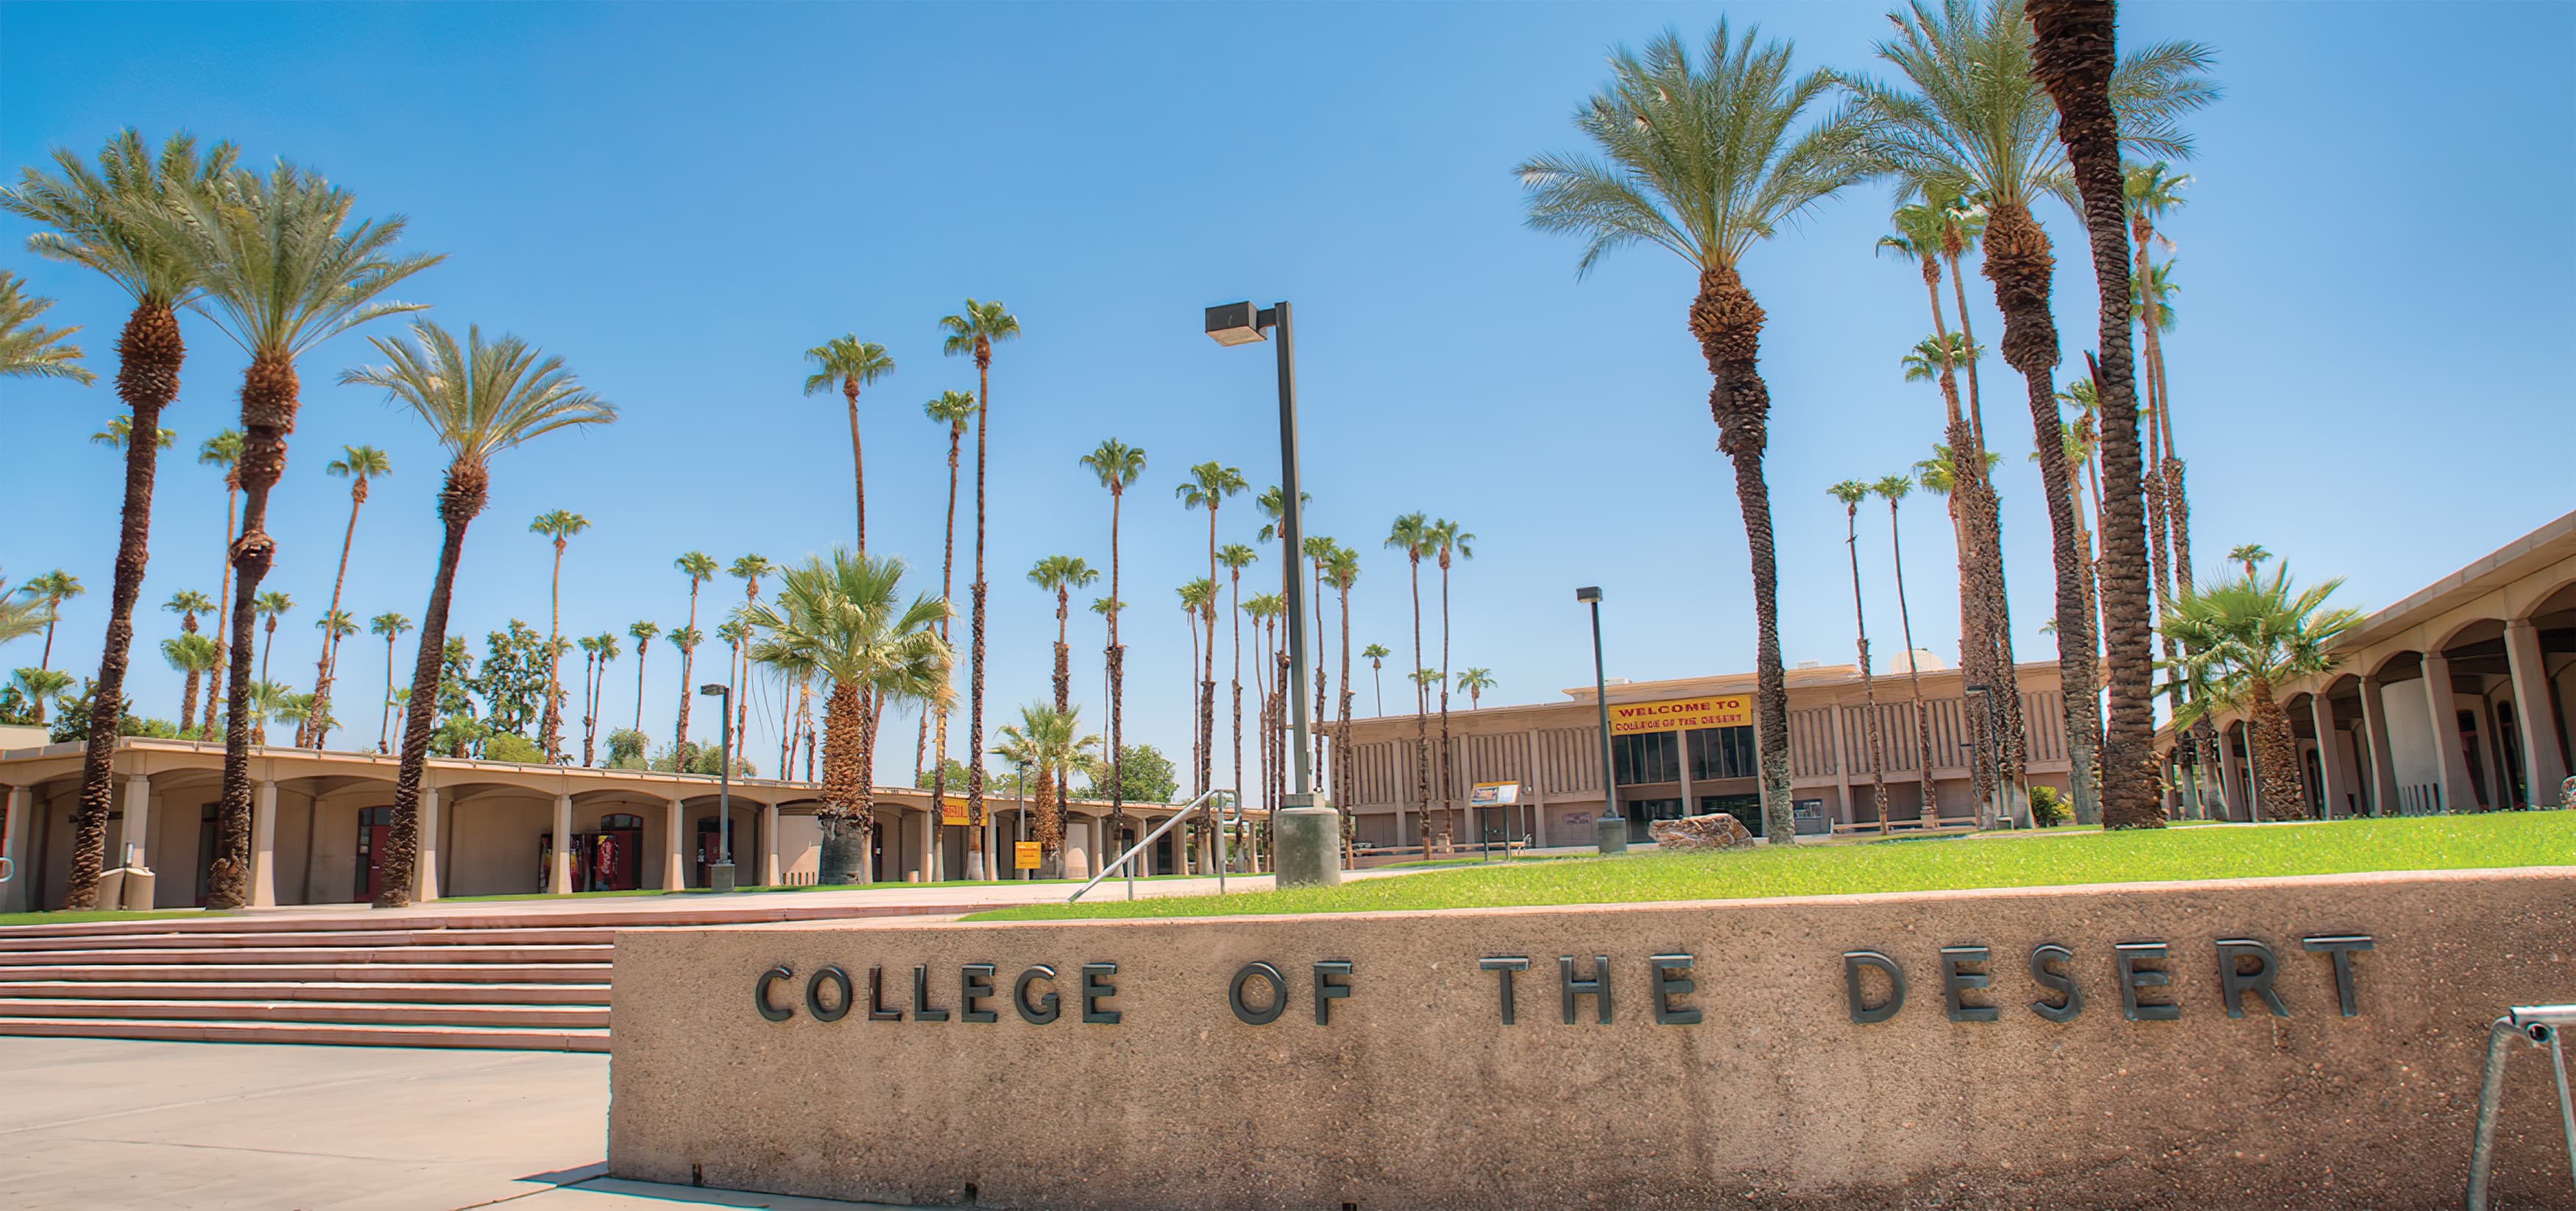 College of the Desert in Palm Springs, California. RSM Design created the campus wide signage guidelines, which includes both vehicular and pedestrian wayfinding and building identities.